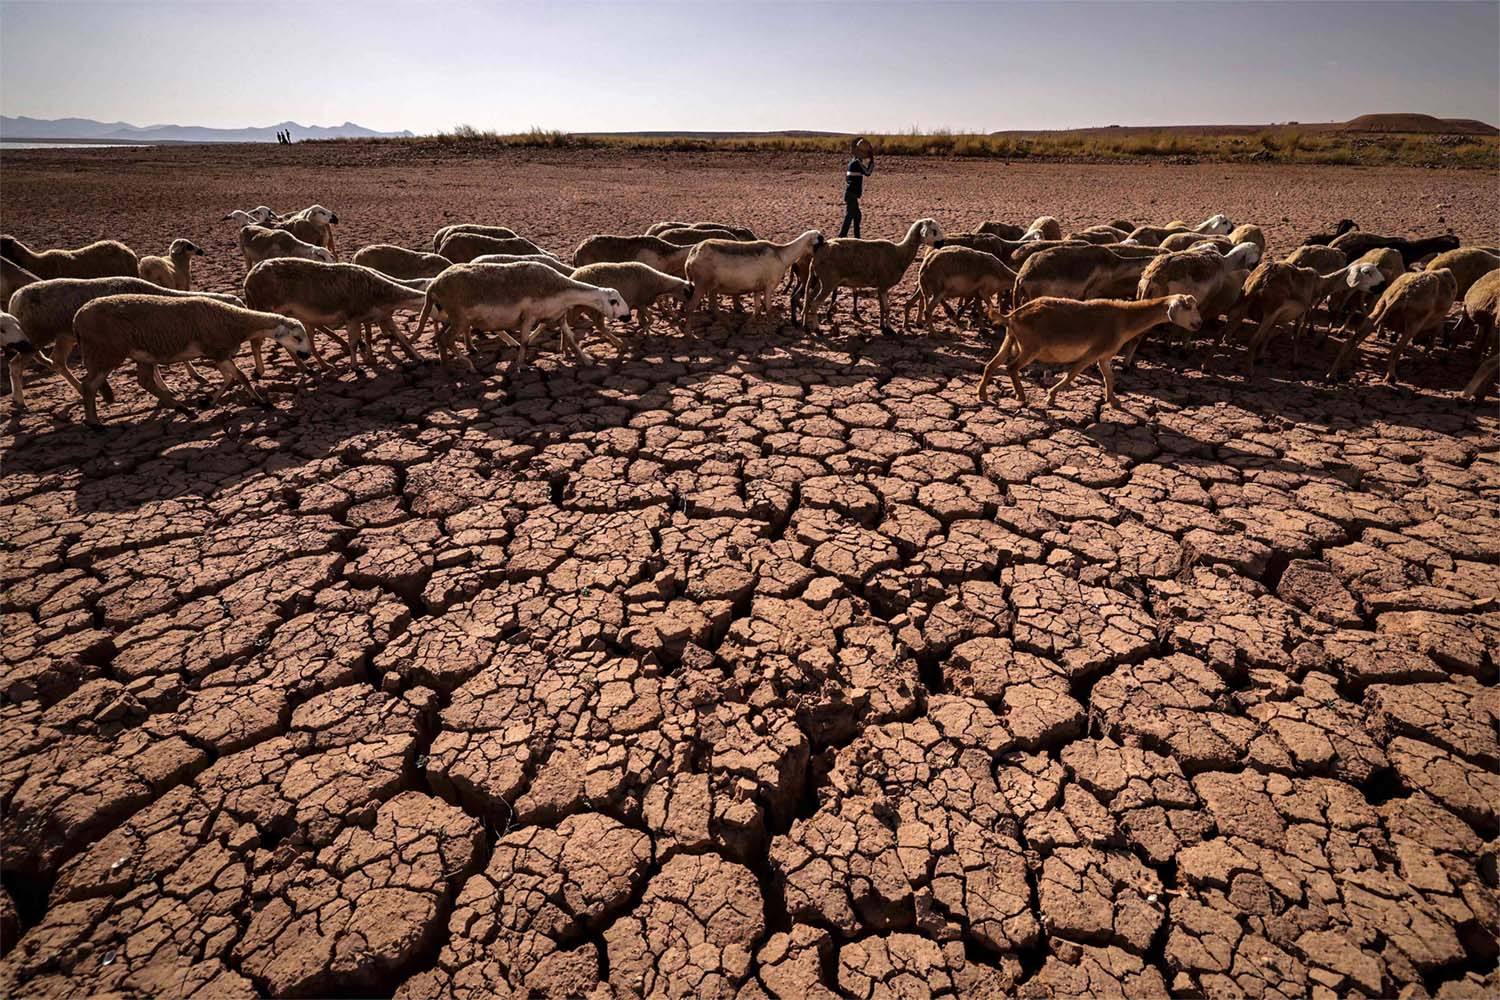 Rain-dependent Morocco is facing it worst drought in at least four decades